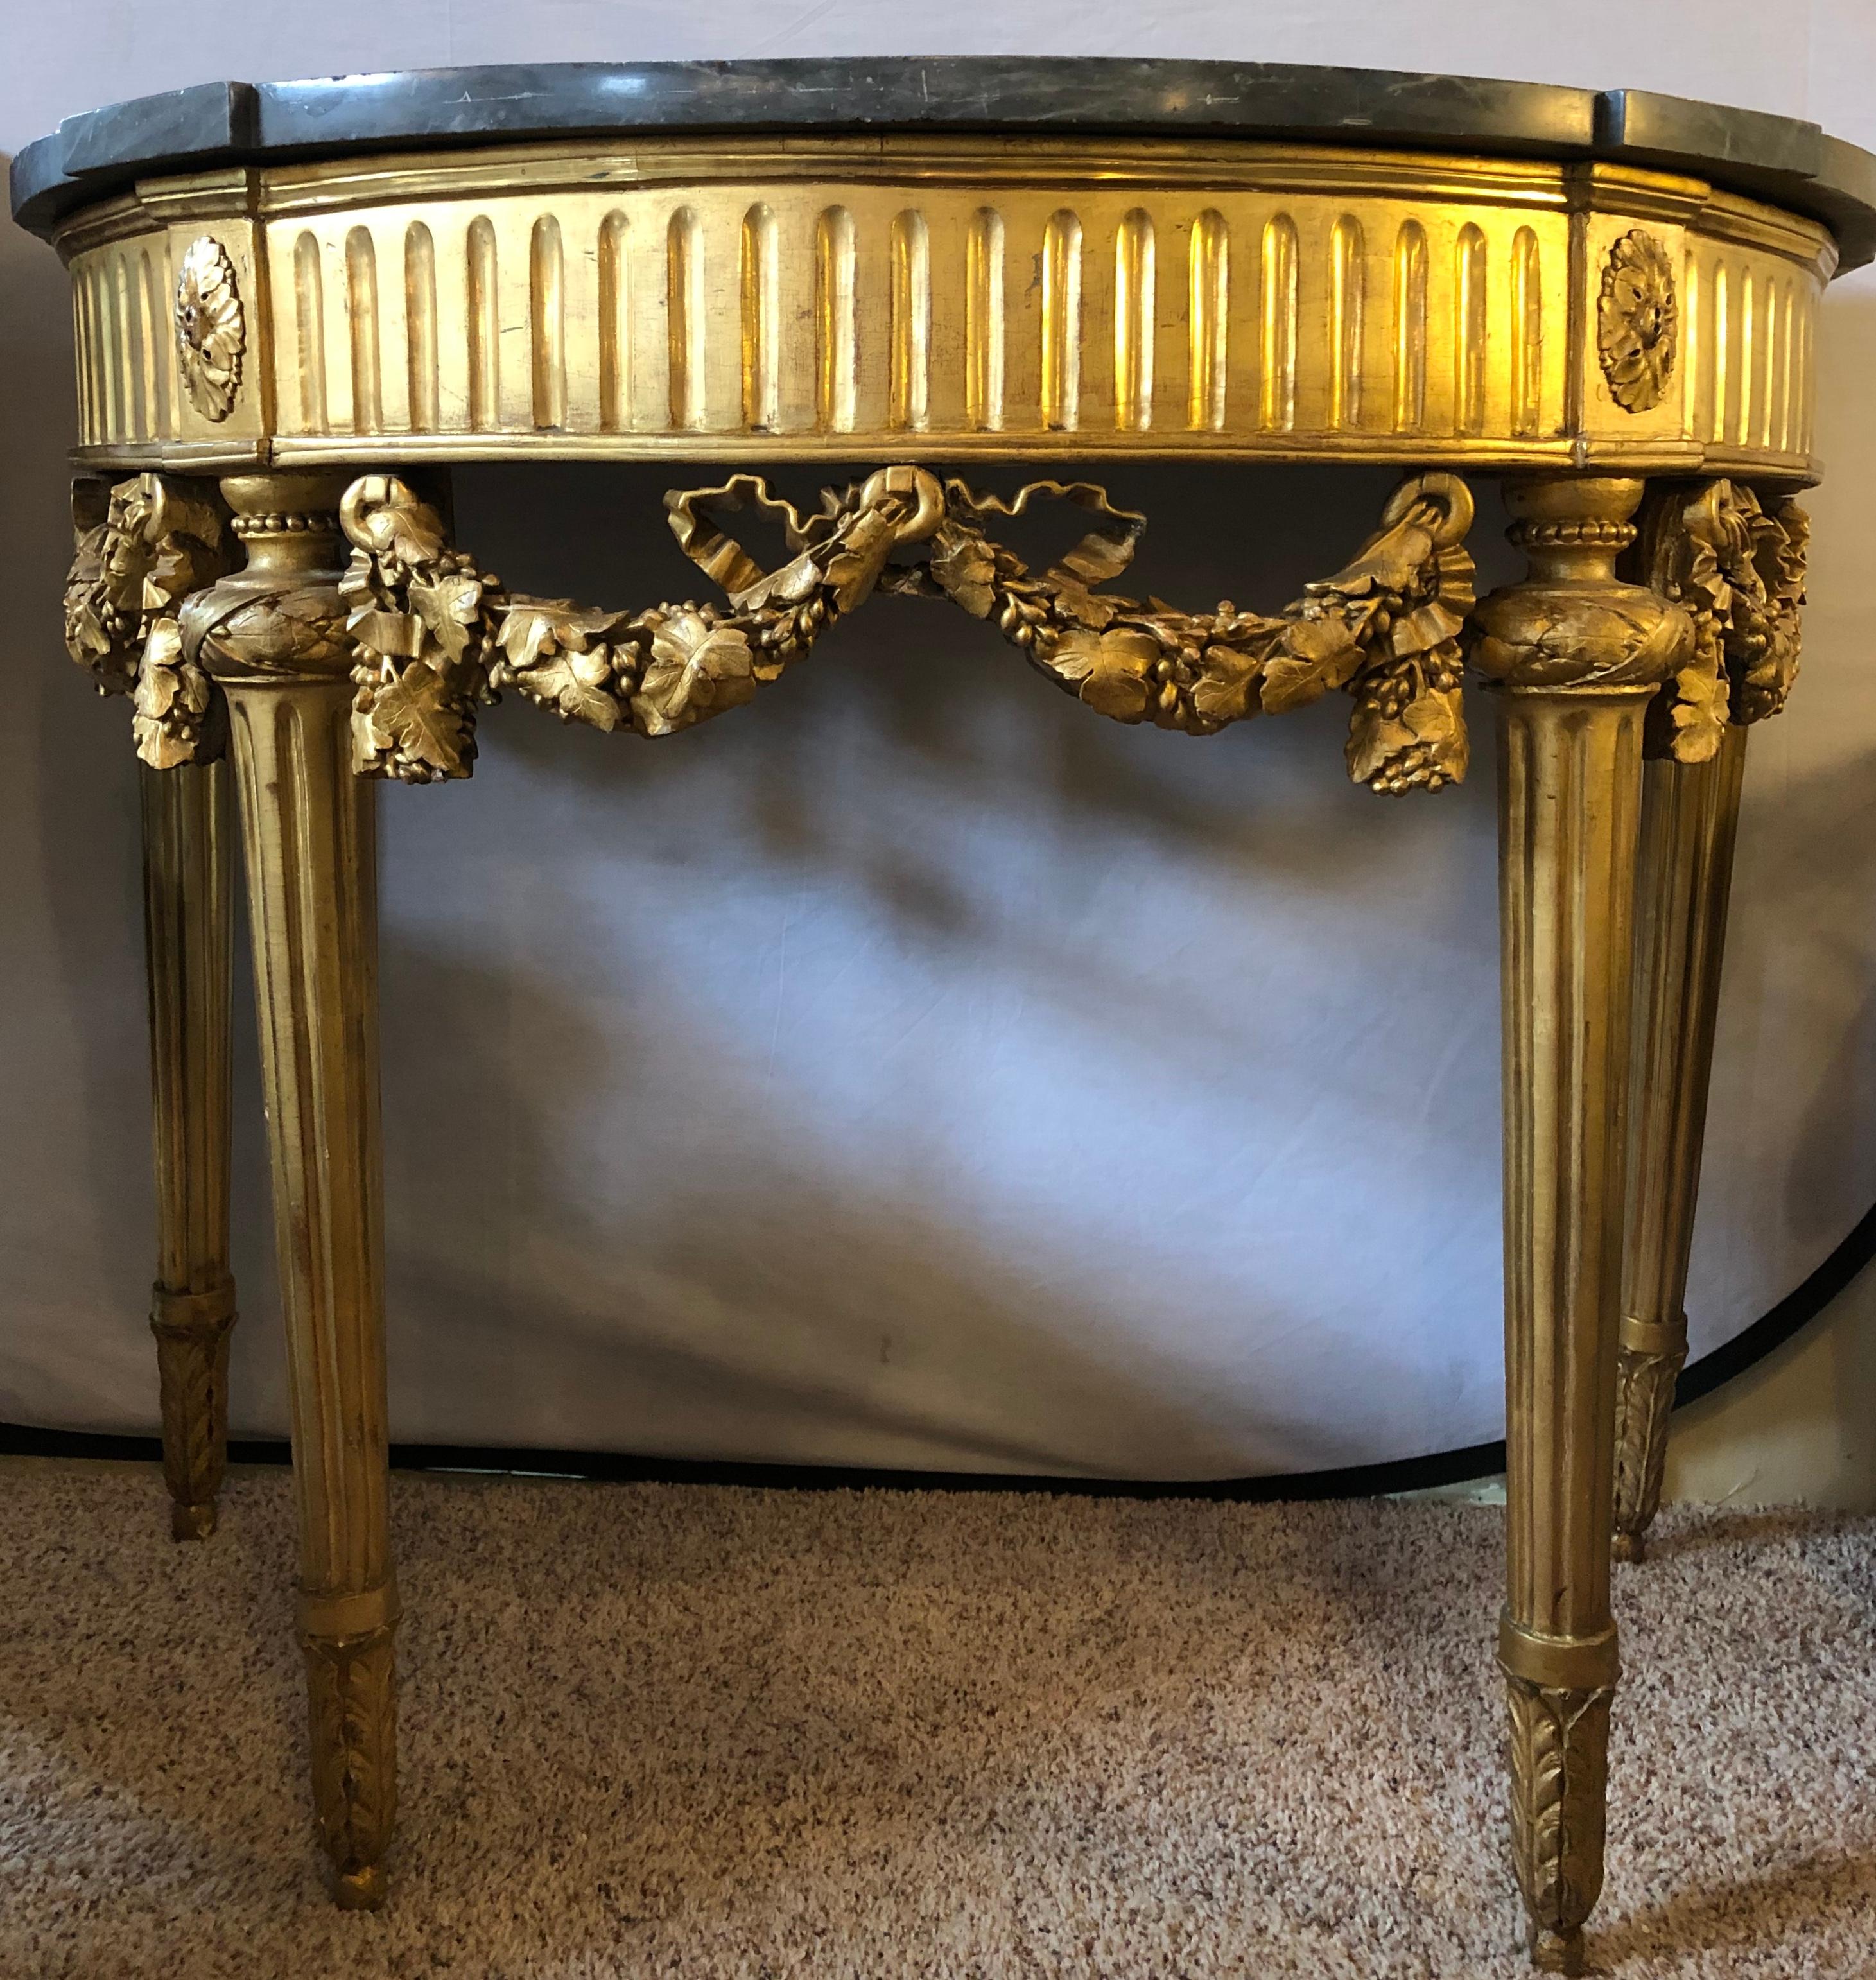 French 19th century Louis XVI console with marble top. This fine gilt console is simply stunning with its gray marble top supported by a ribbon and bow carved leaf design apron and group of four carved tapering legs, mid-late 19th century.
 